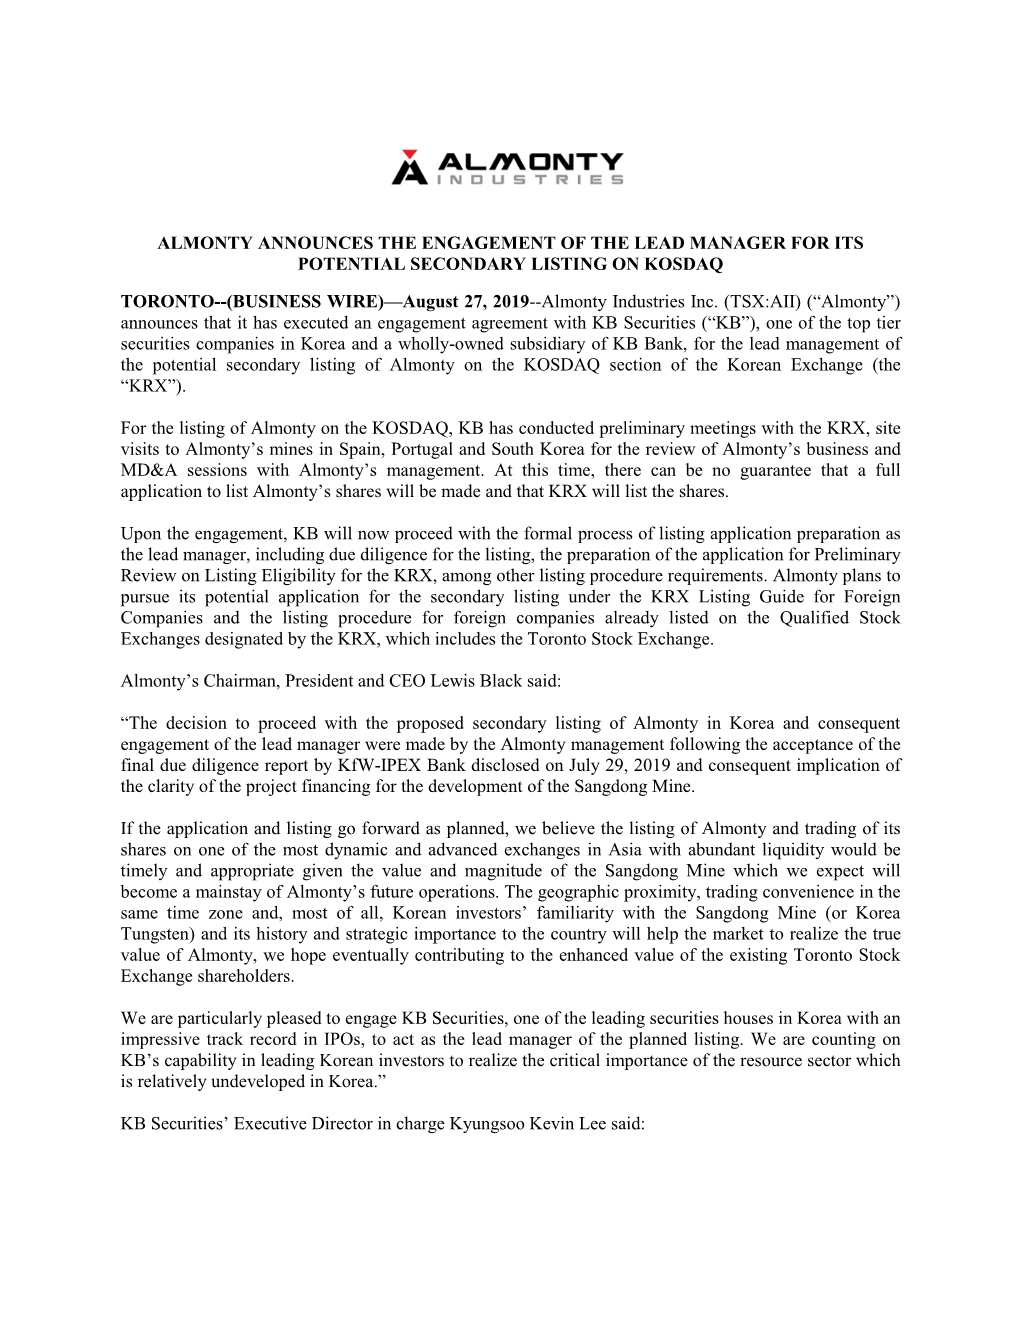 Almonty Announces the Engagement of the Lead Manager for Its Potential Secondary Listing on Kosdaq